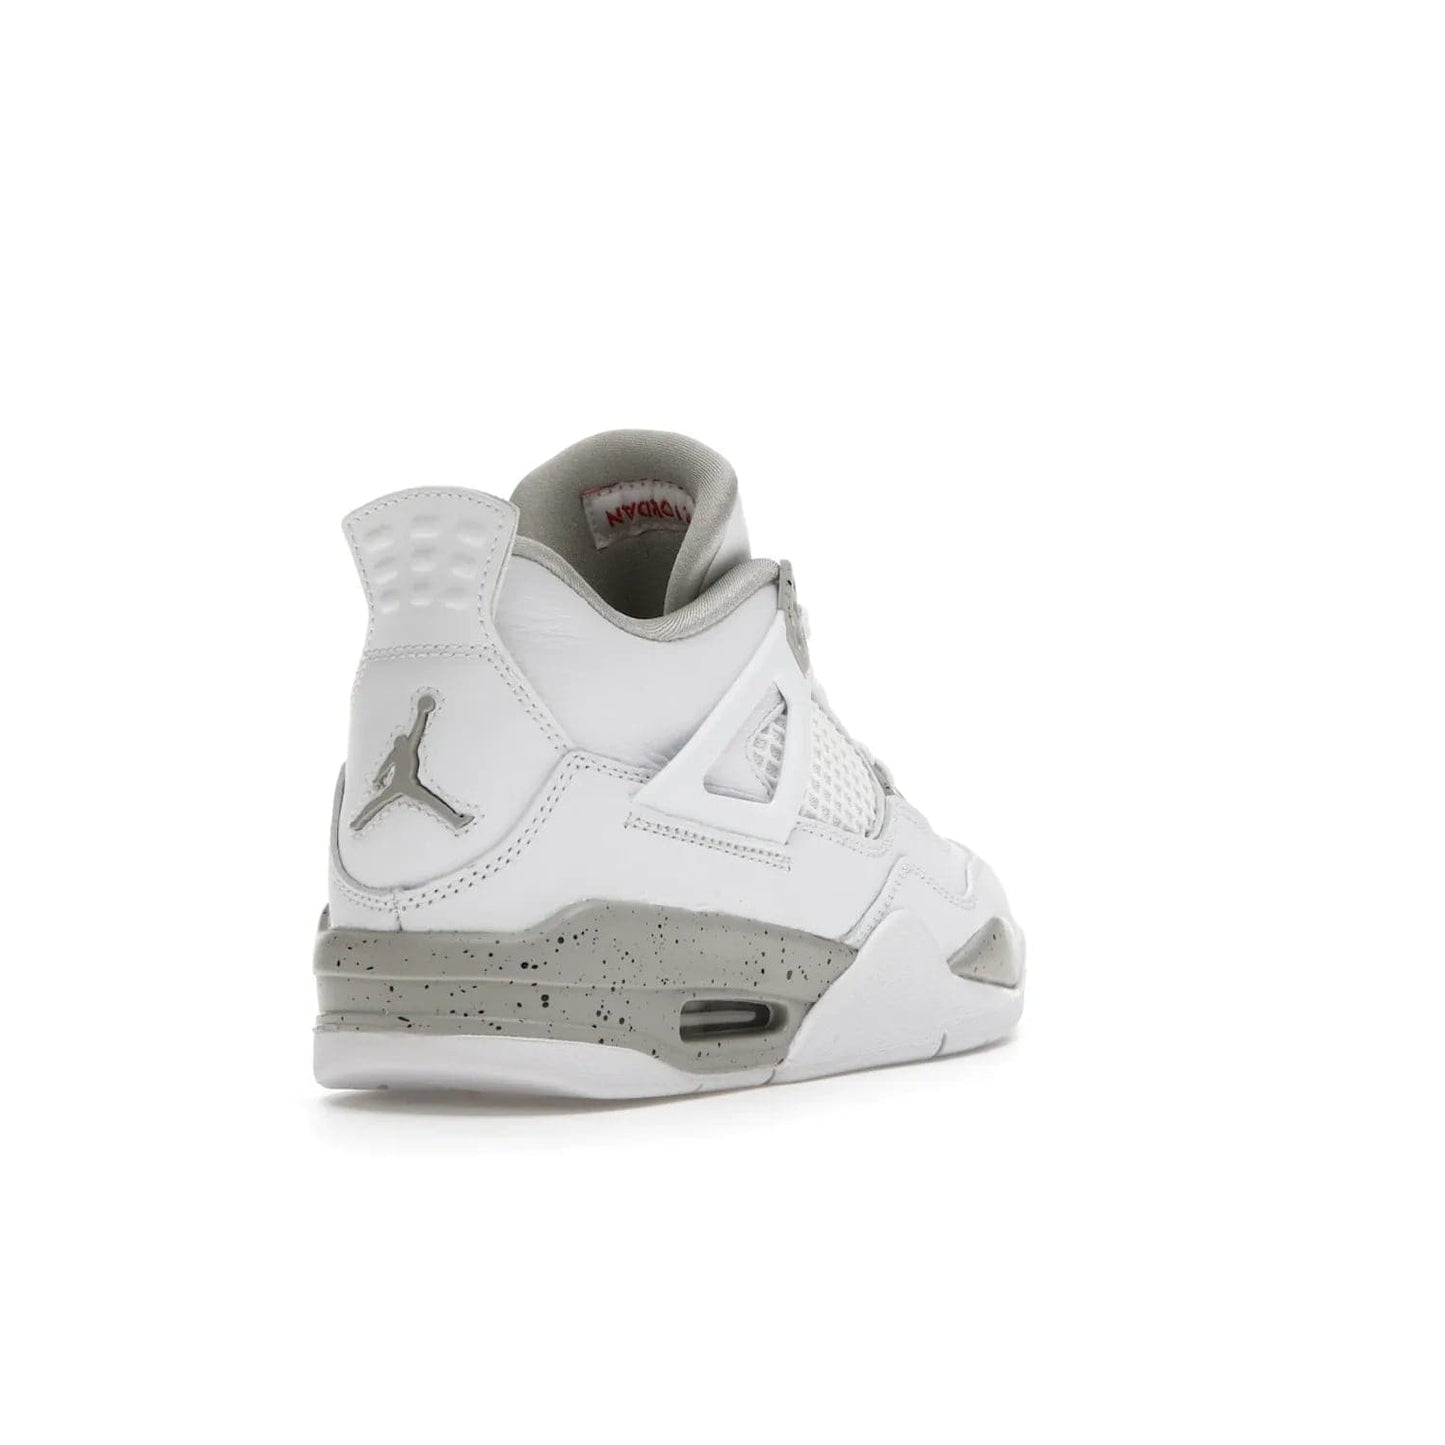 Jordan 4 Retro White Oreo (2021) (GS) - Image 31 - Only at www.BallersClubKickz.com - White Oreo Air Jordan 4 Retro 2021 GS - Iconic sneaker silhouette with white canvas upper, Tech Grey detailing, and Fire Red accents. Available July 2021.